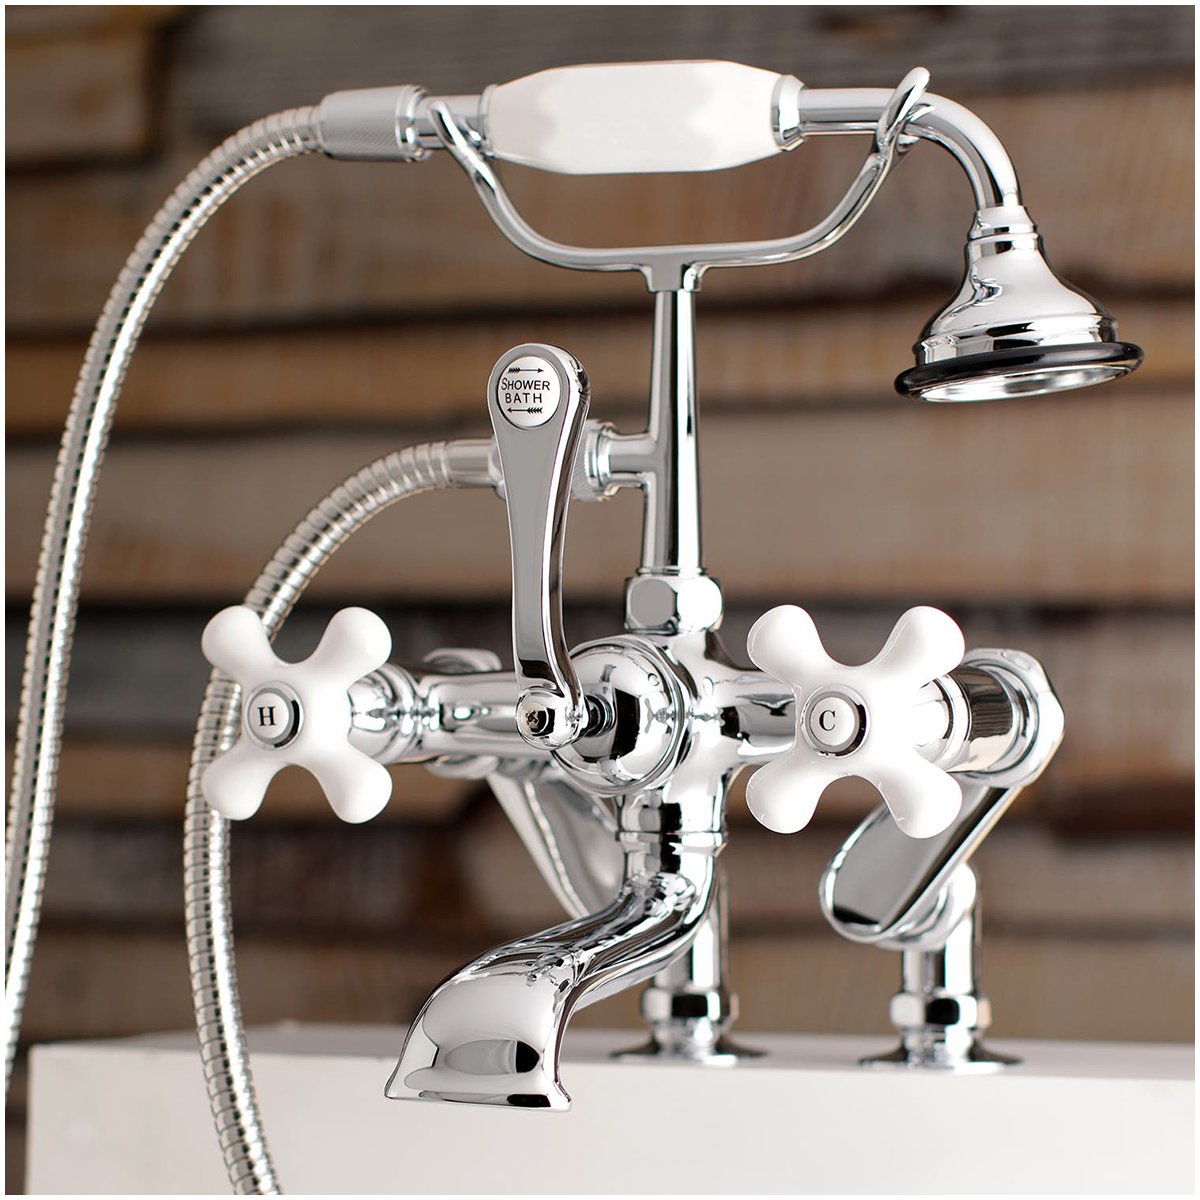 Kingston Brass Aqua Vintage 7-Inch Tub Faucet with Hand Shower in Polished Chrome